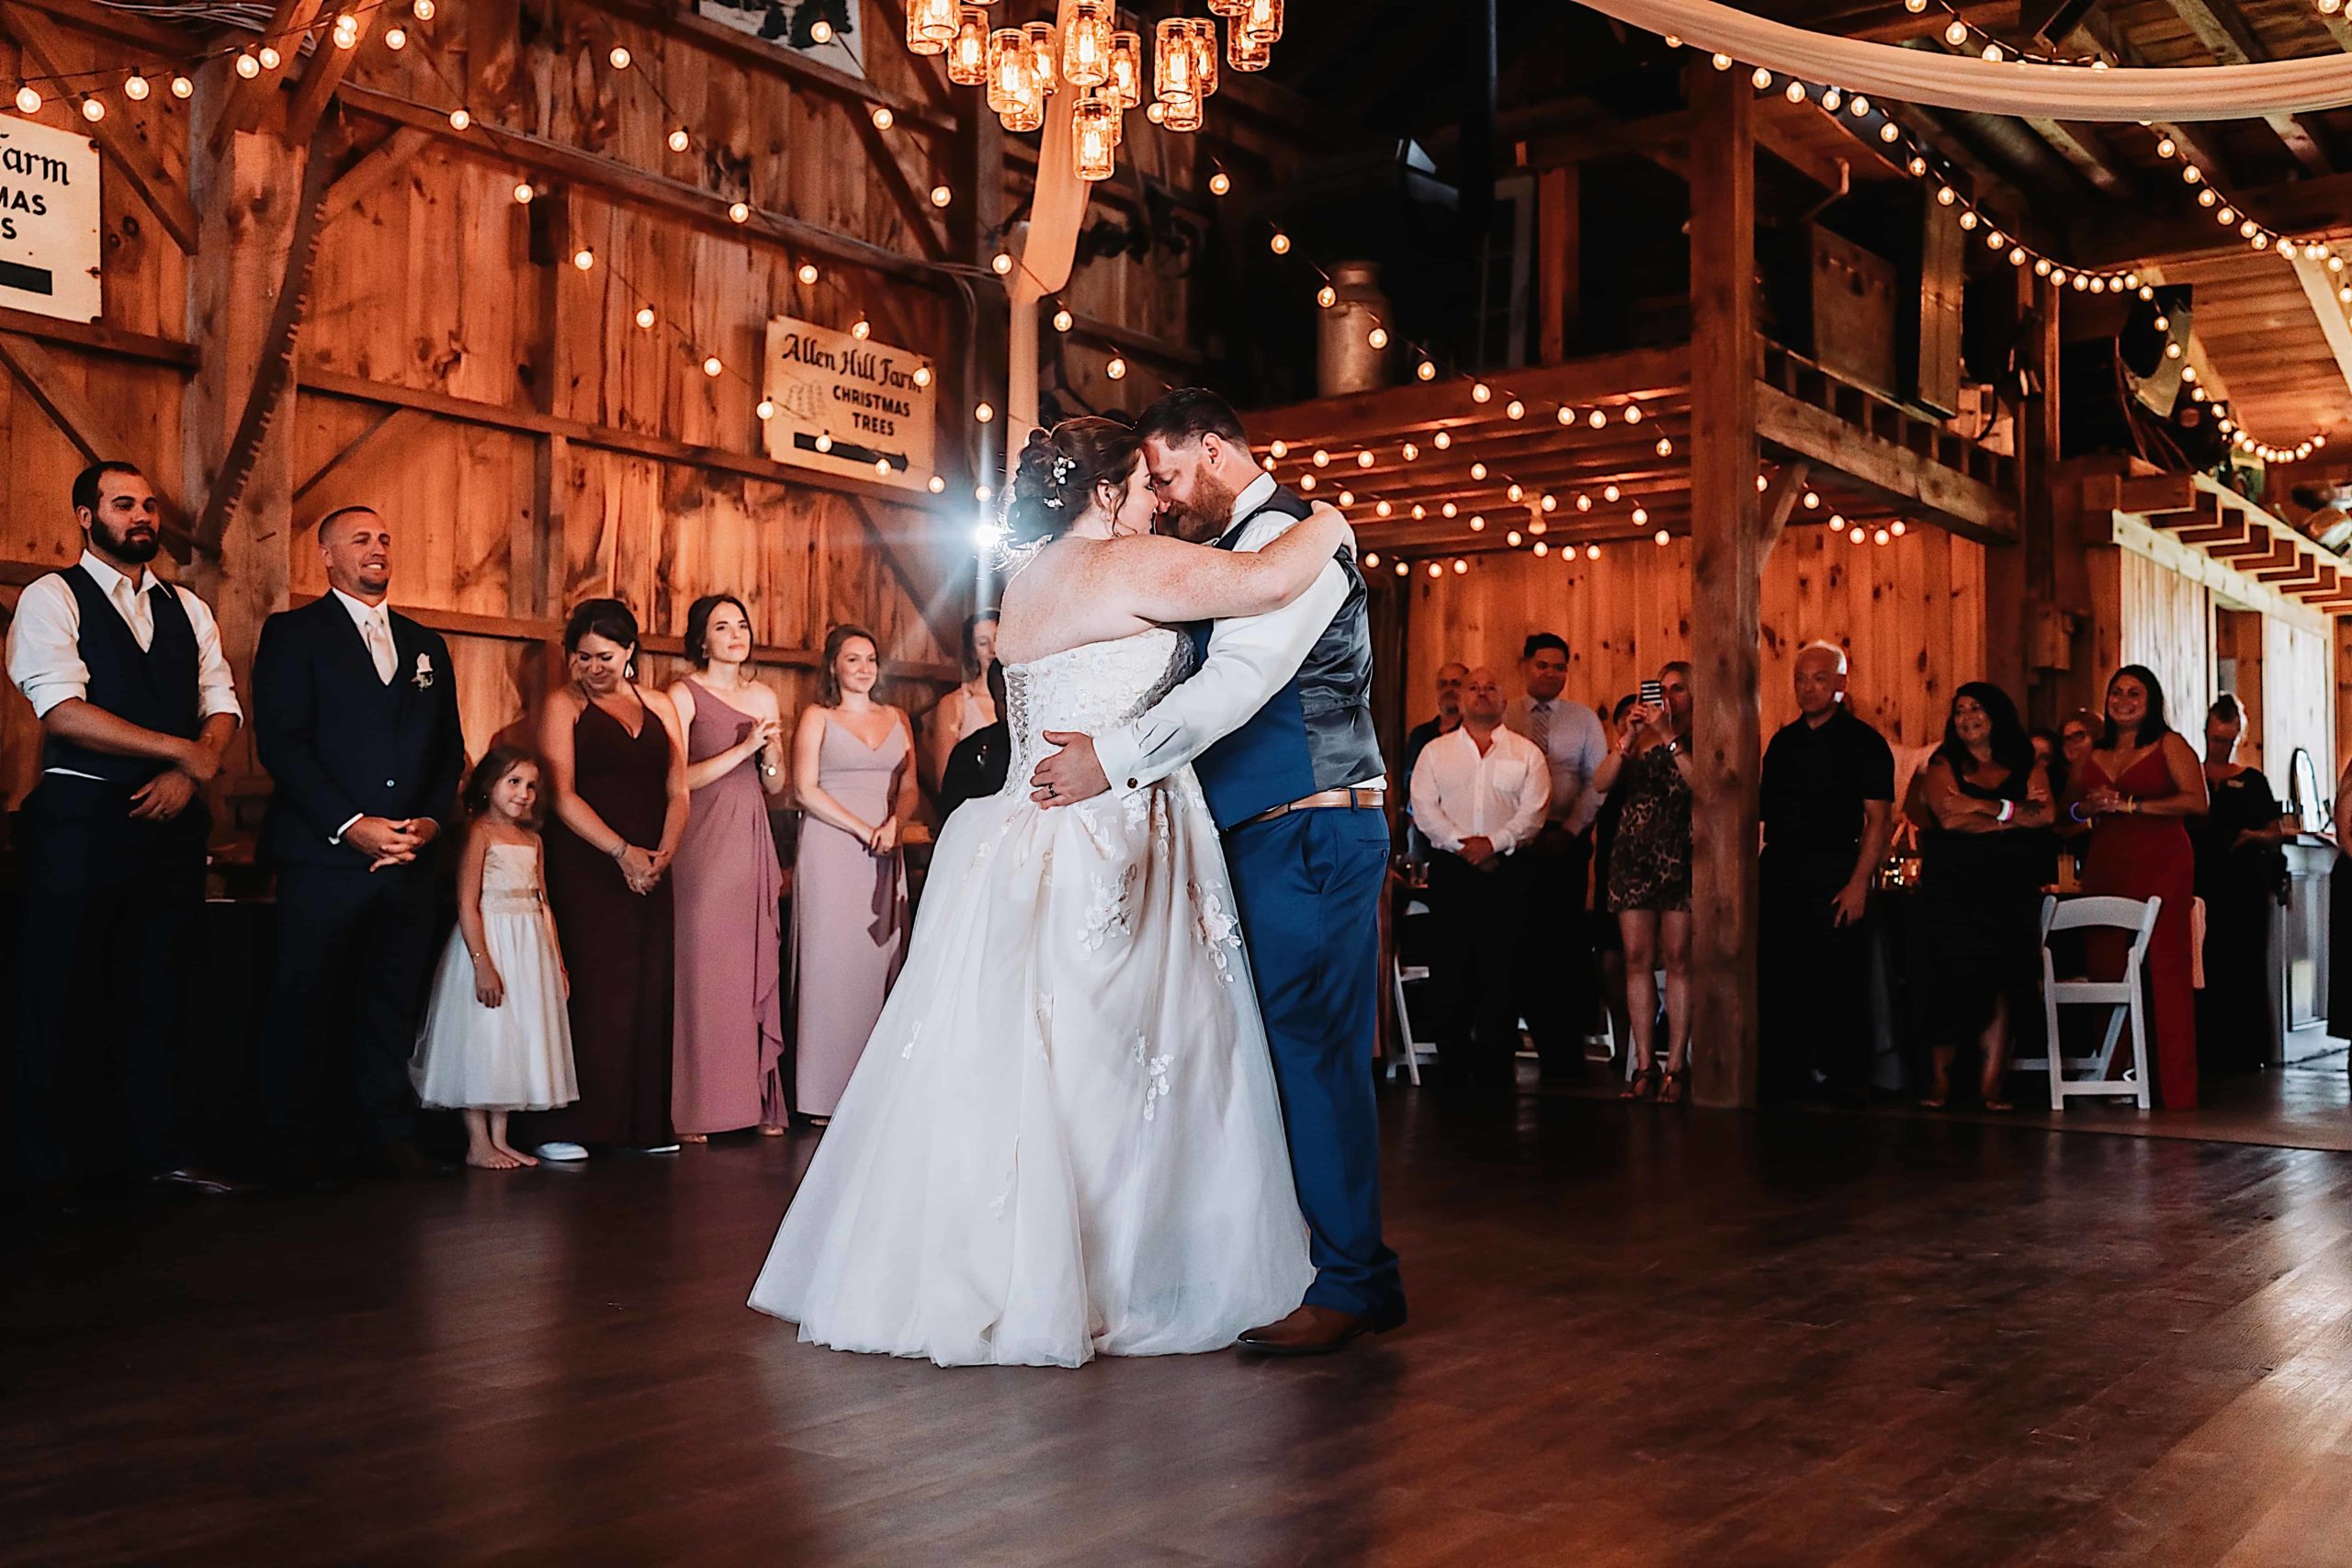 Wedding couple sharing a first dance at Wrights Mill Farm rustic bar wedding venue in connecticut